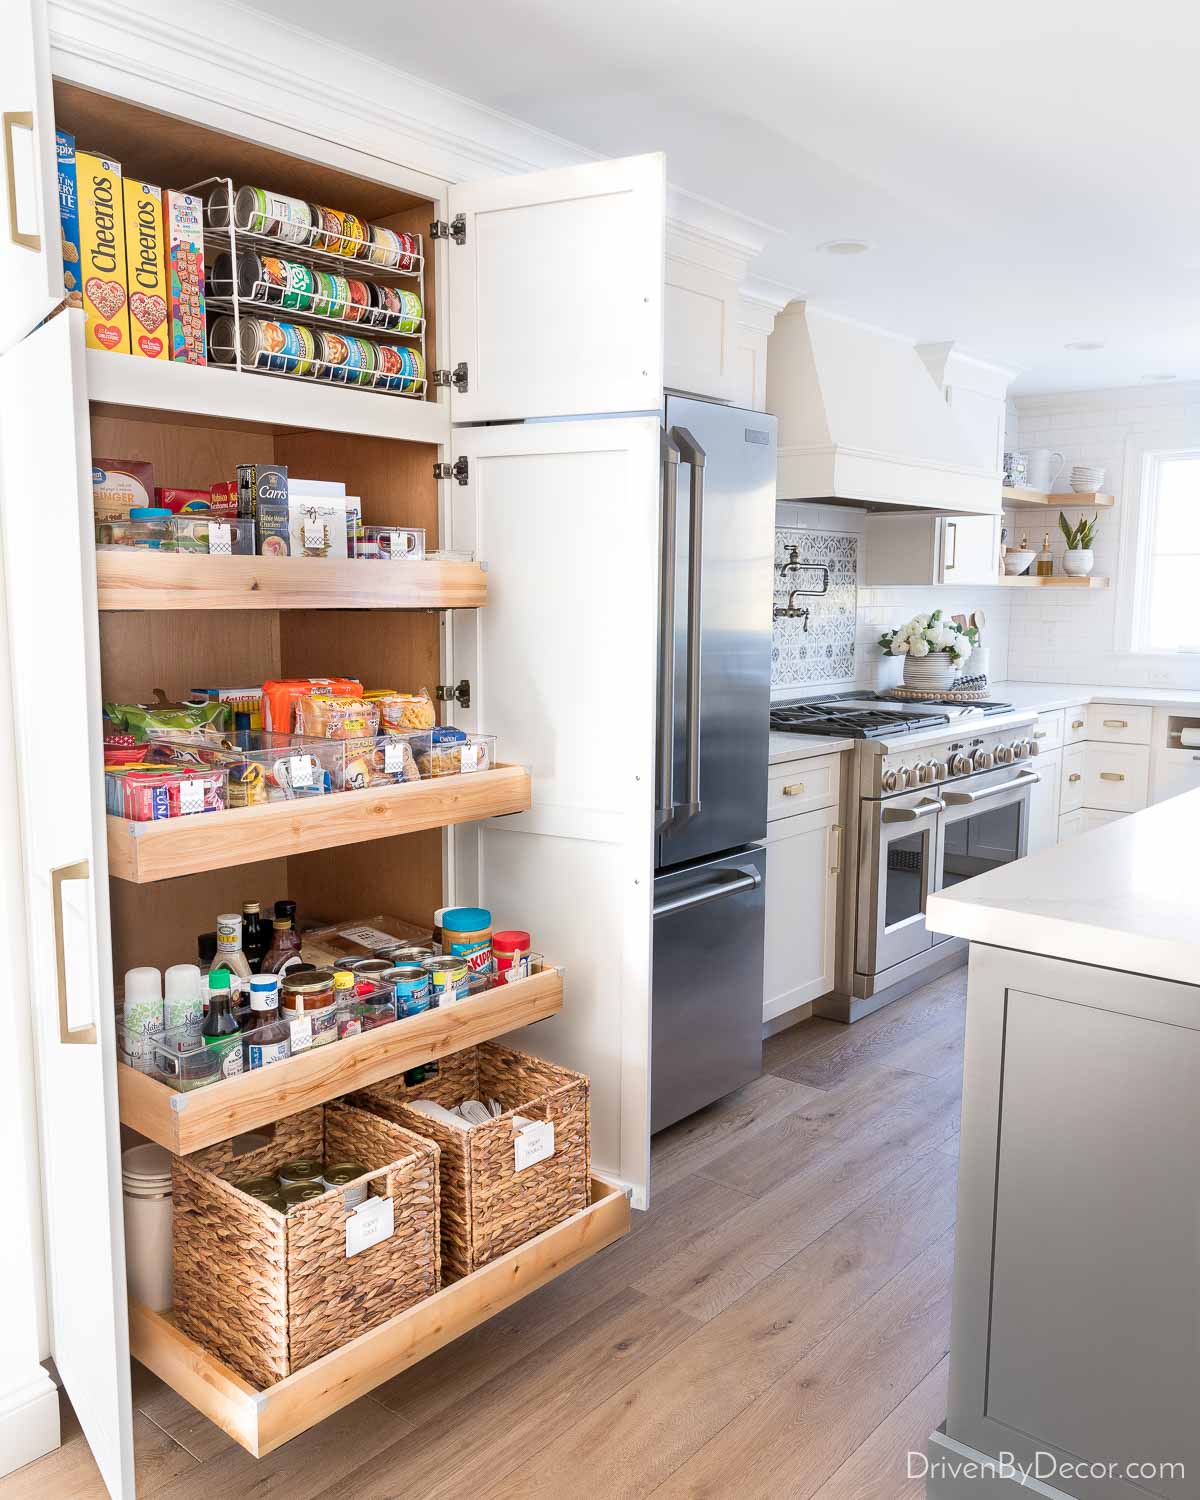 A Kitchen Pantry Design That Maximizes The Use of a Small Space — Degnan  Design-Build-Remodel